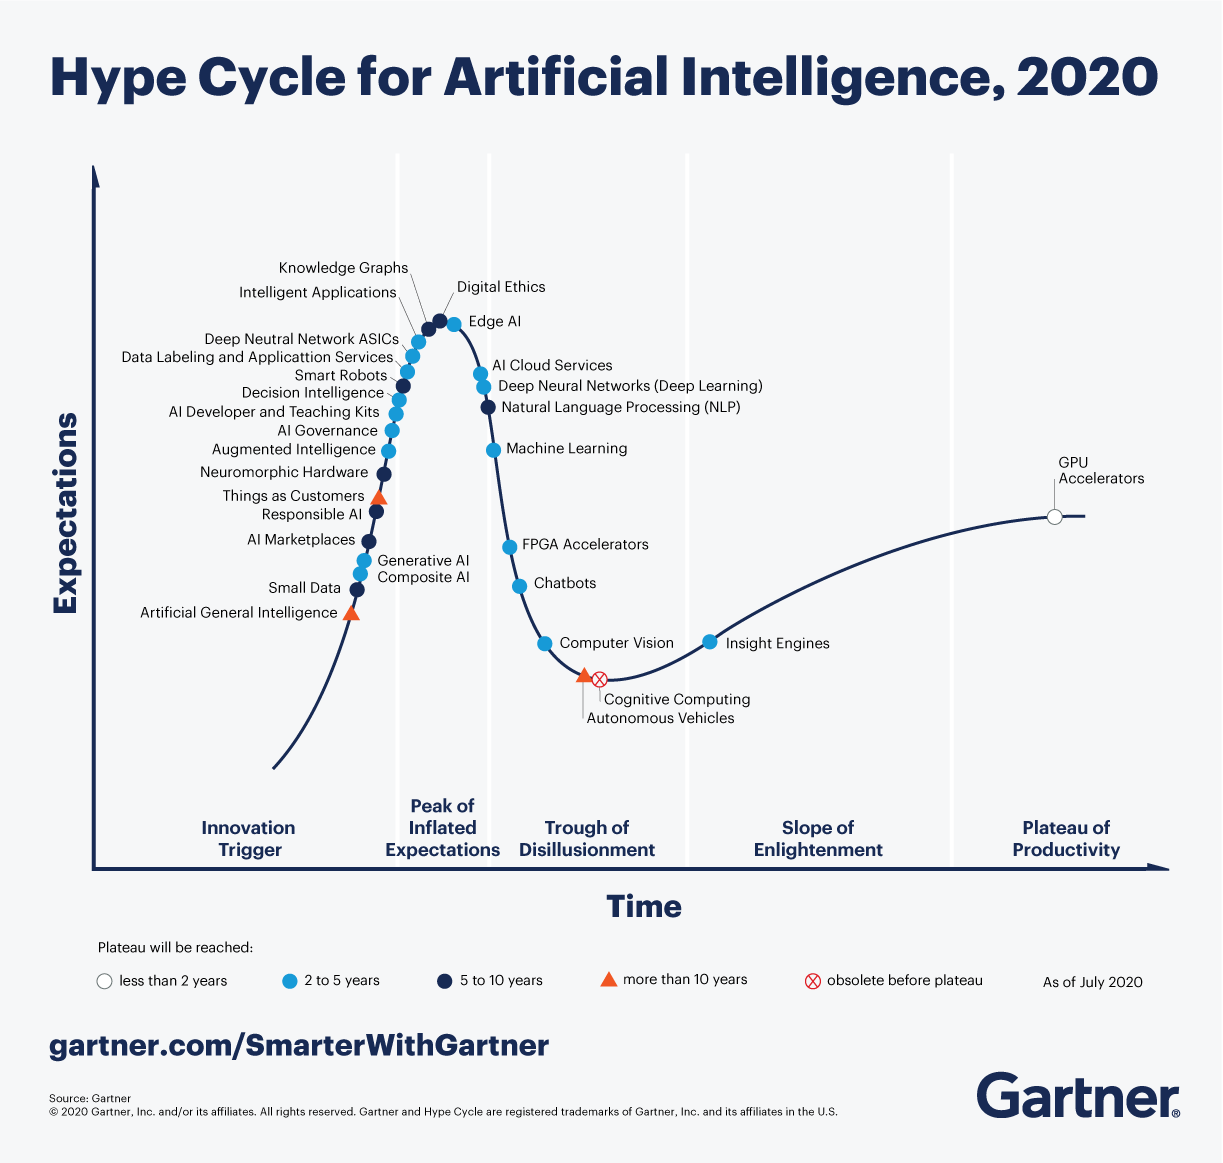 The Gartner Hype Cycle for Artificial Intelligence, 2020